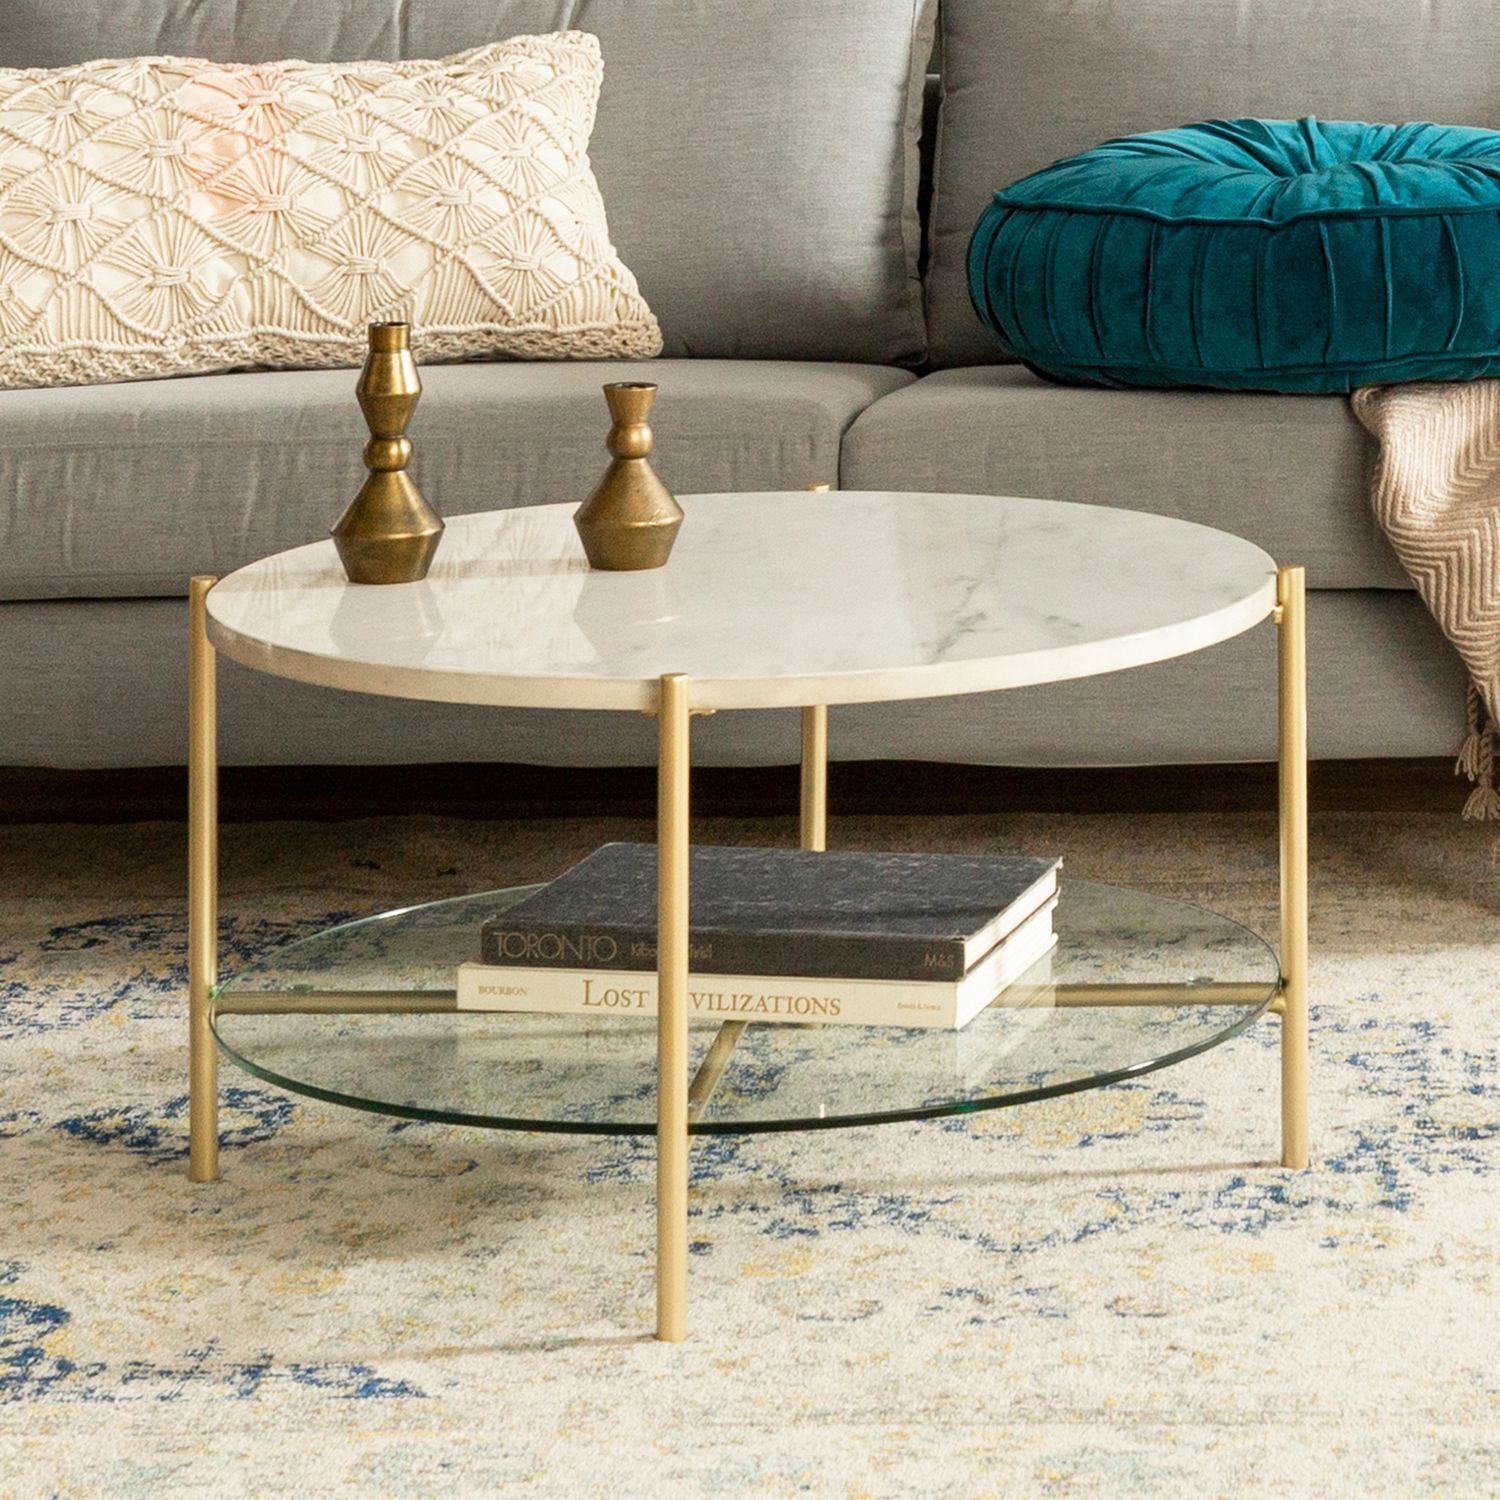 Round White Faux Marble & Gold Coffee Table With Glass Shelf | Pier 1 Within Modern Round Faux Marble Coffee Tables (View 5 of 15)